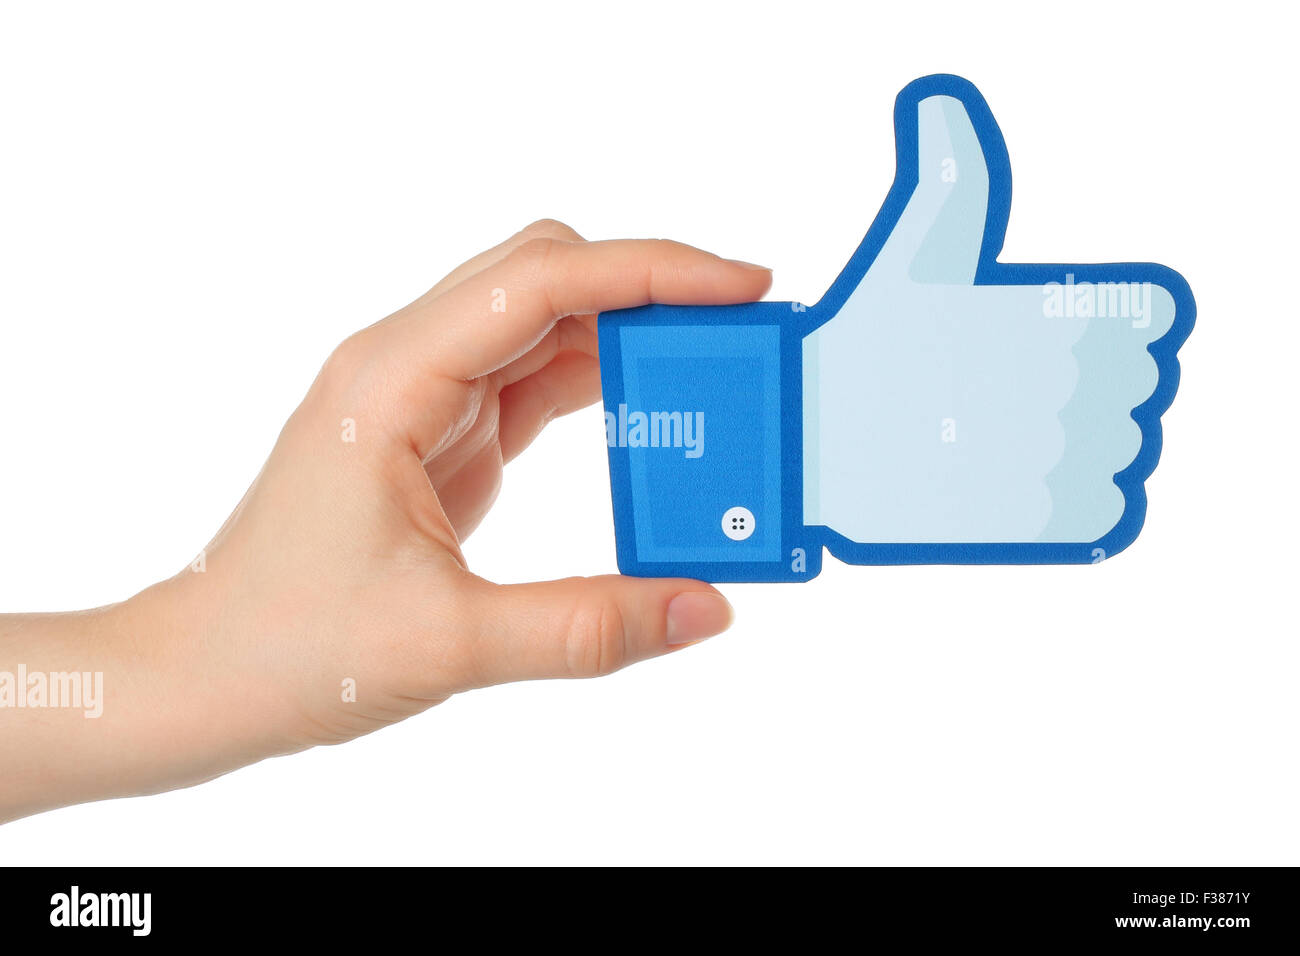 KIEV, UKRAINE - JANUARY 24, 2015: Hand holds facebook thumbs up sign printed on paper on white background. Stock Photo